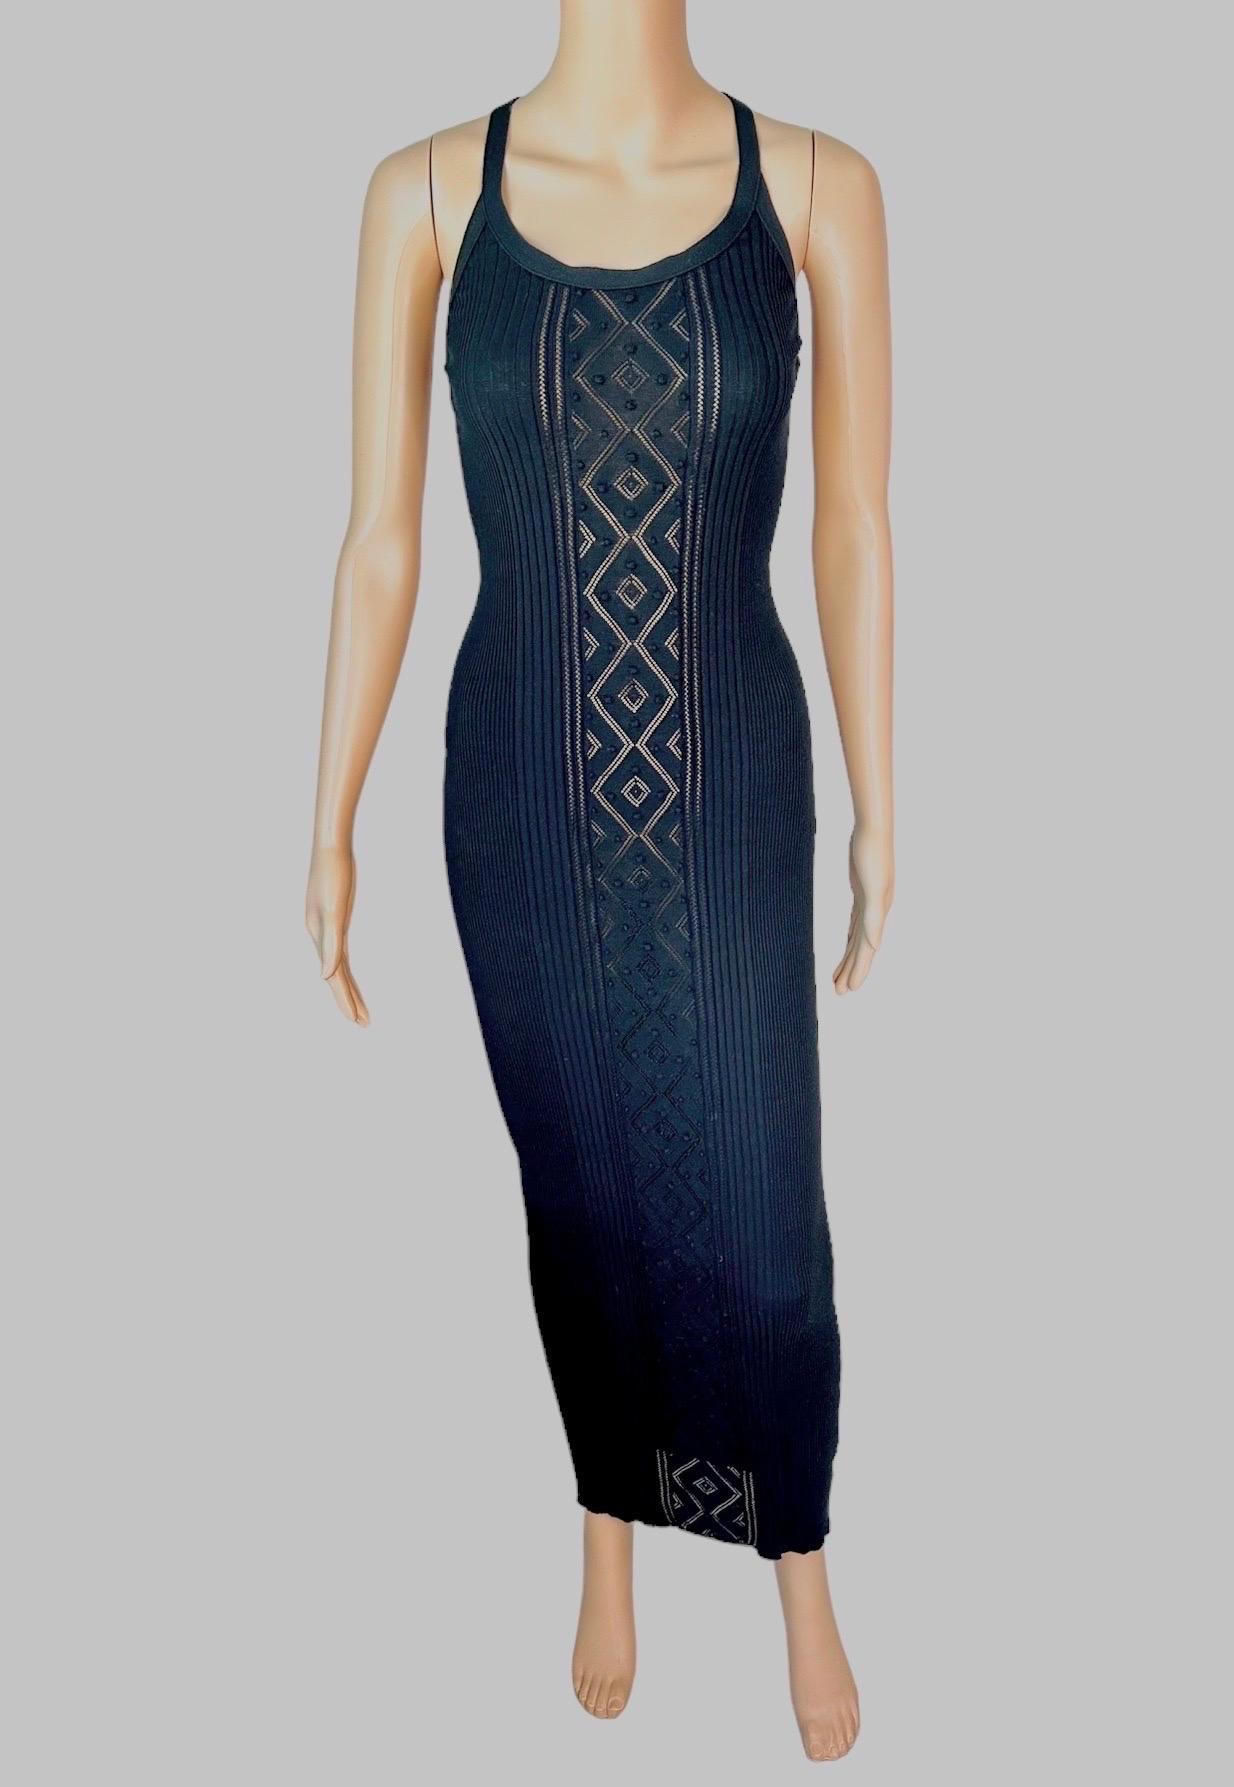 Jean Paul Gaultier Classique Vintage Semi-Sheer Knit Black Maxi Dress       In Good Condition For Sale In Naples, FL